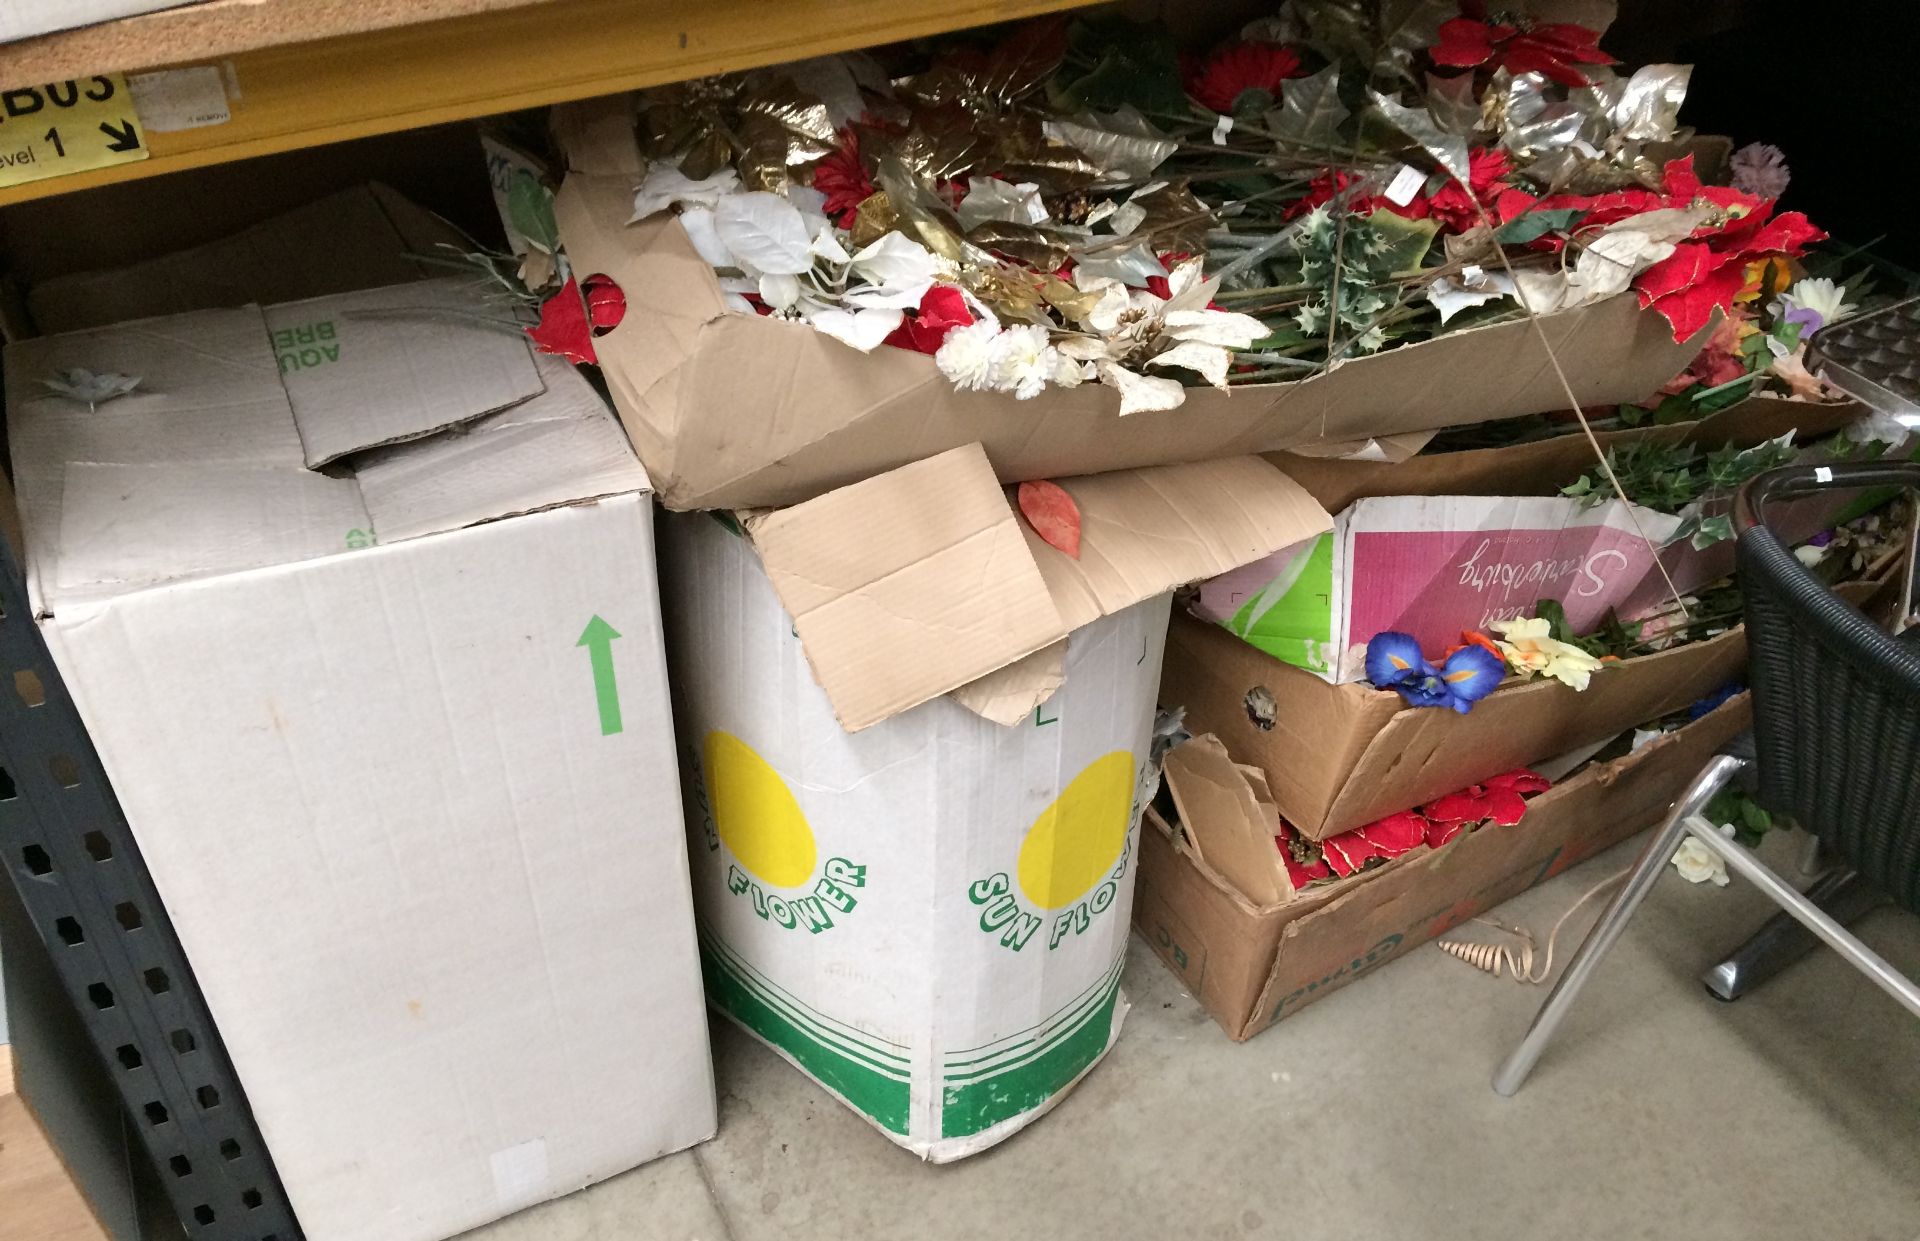 Contents to bay - 10 x large boxes containing mainly artificial flowers but includes 1 box of